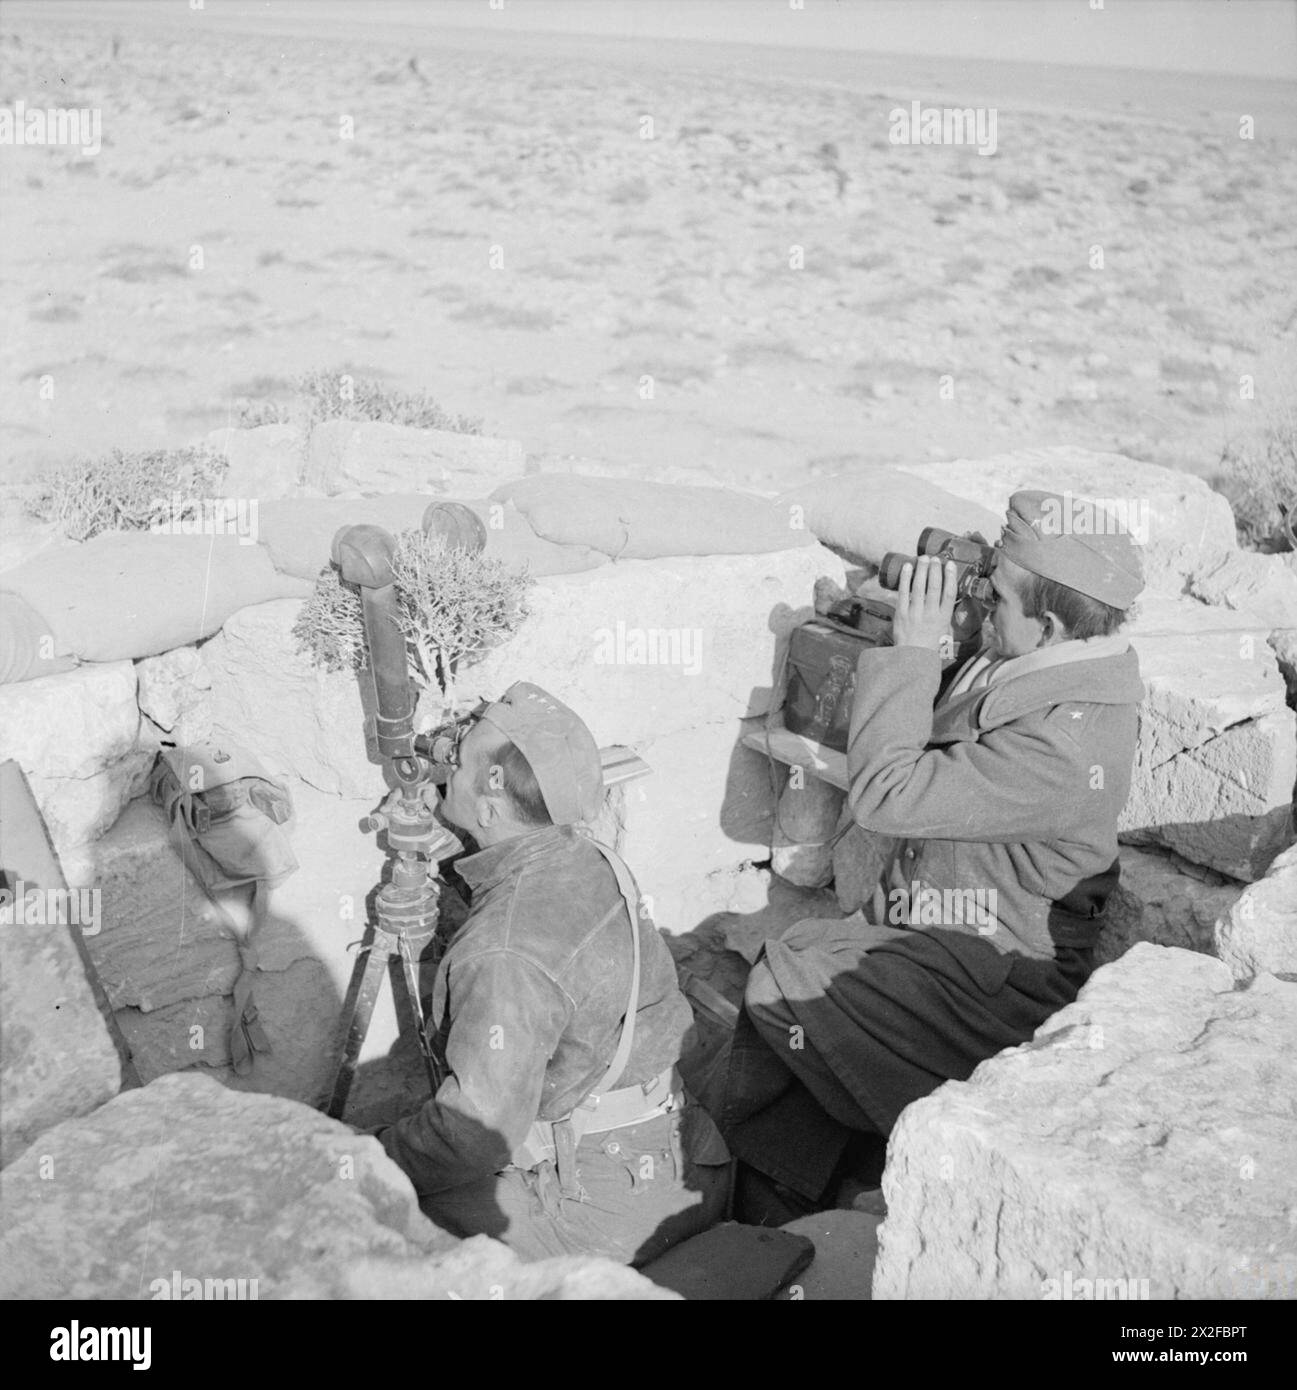 THE POLISH ARMY IN THE WESTERN DESERT CAMPAIGN, 1940-1942 - An Observation Post of the Carpathian Artillery Regiment located in the ruins of an old Greek temple, 16 February 1942. Both officers (Captain and Second Lieutenant) are looking out for the enemy, the one on the left using scissors binoculars. These pictures taken at the extreme forward positions around Carmuset er Regem (Karmusat ar Rijam) area near Gazala, show infantry and artillery units of the Polish Independent Carpathian Rifles Brigade facing German and Italian forces British Army, Polish Army, Polish Armed Forces in the West, Stock Photo